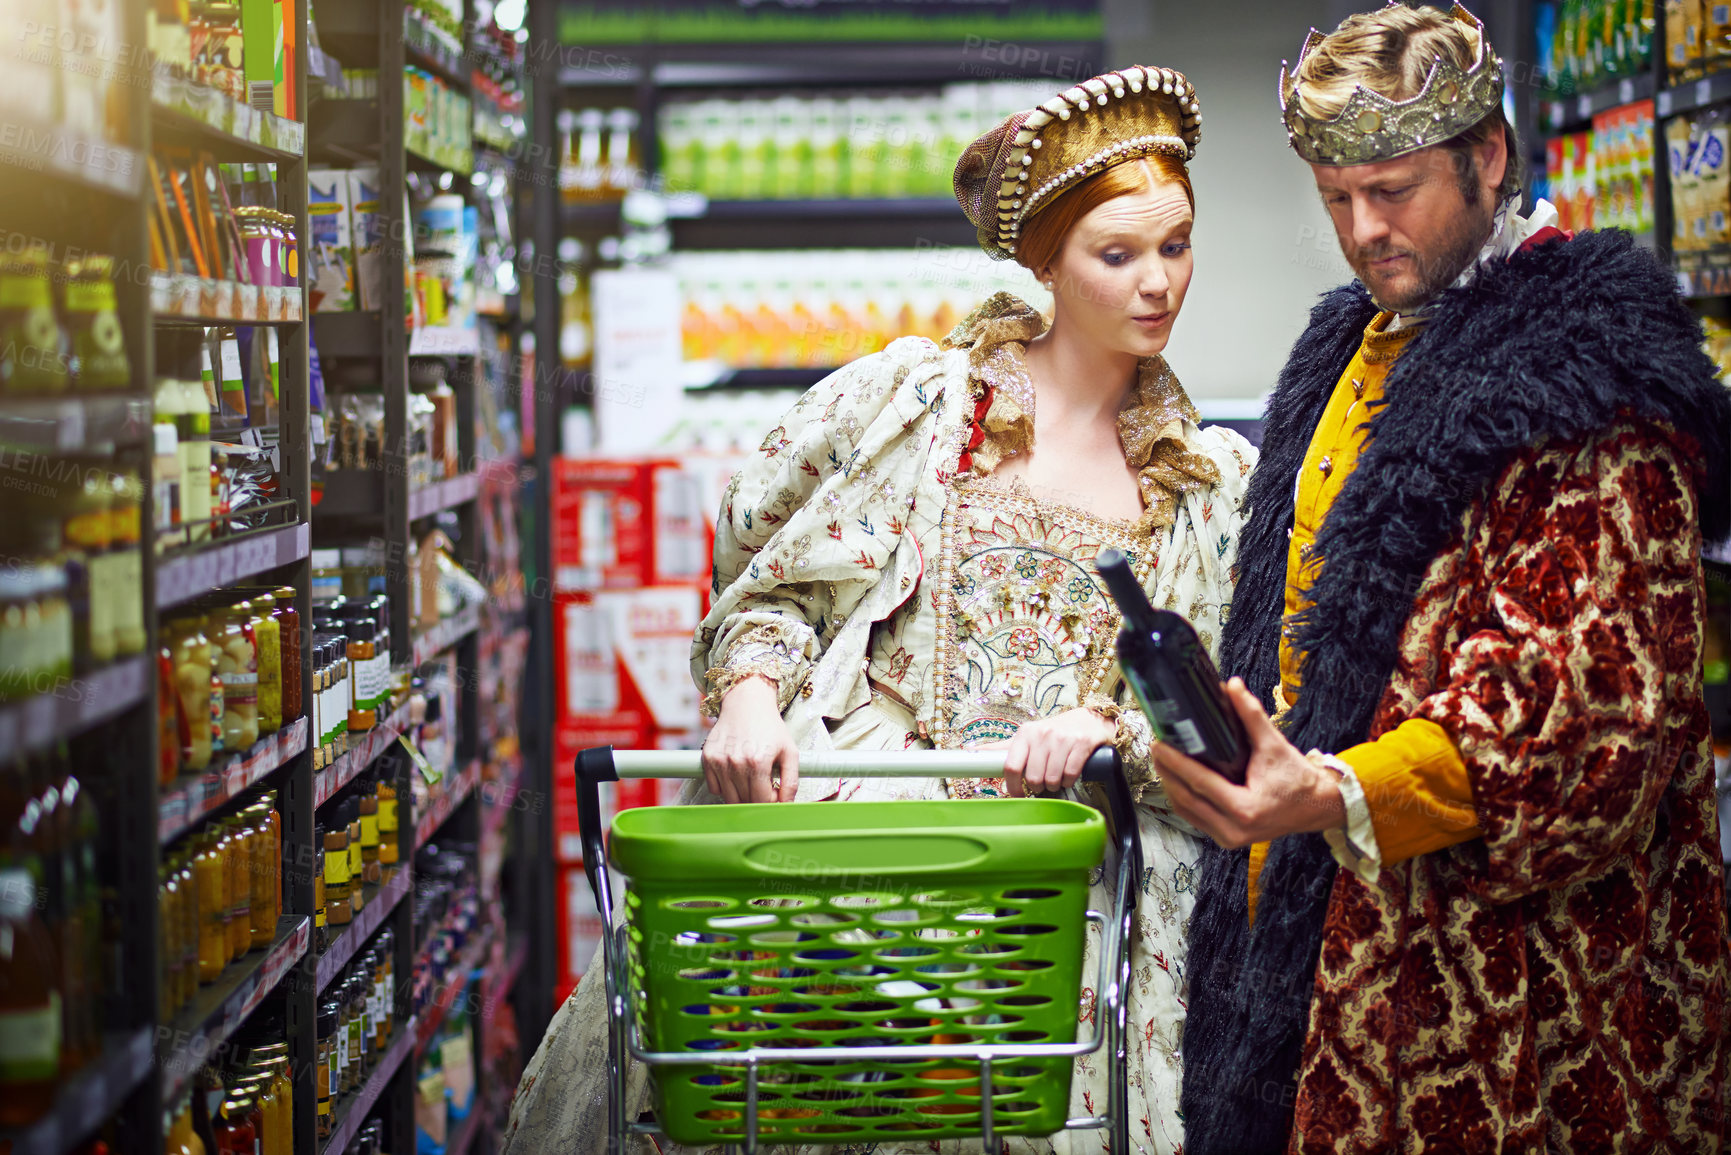 Buy stock photo Shot of a king and queen looking at goods while shopping in a modern grocery store